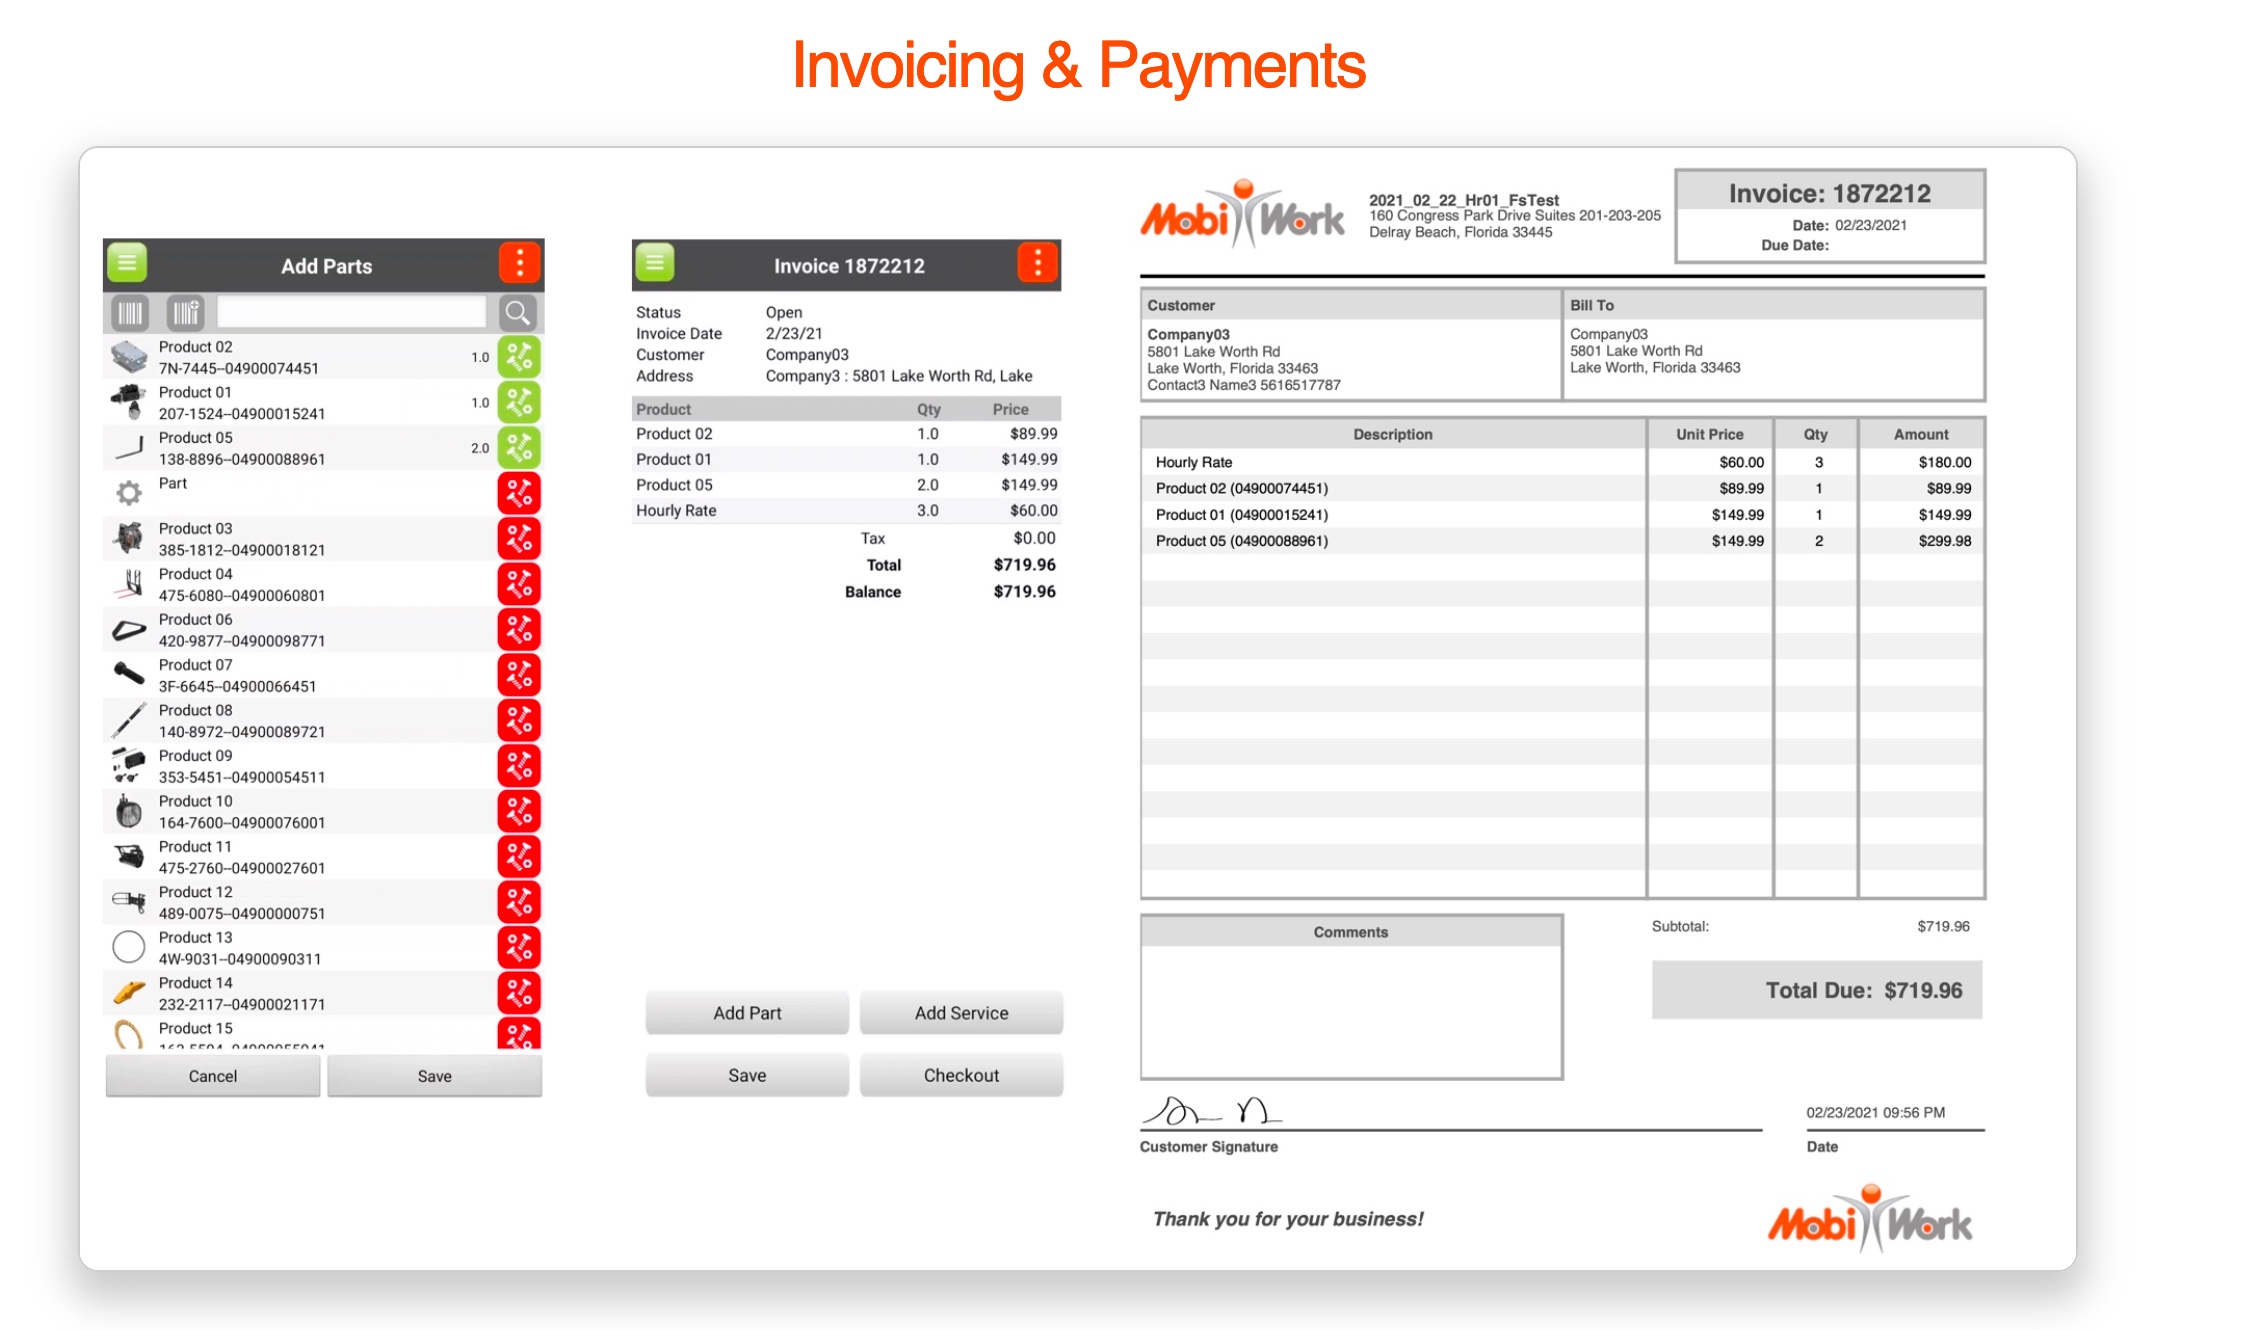 Invoice your customers accurately (correct parts, services & prices) and immediately to get paid faster!